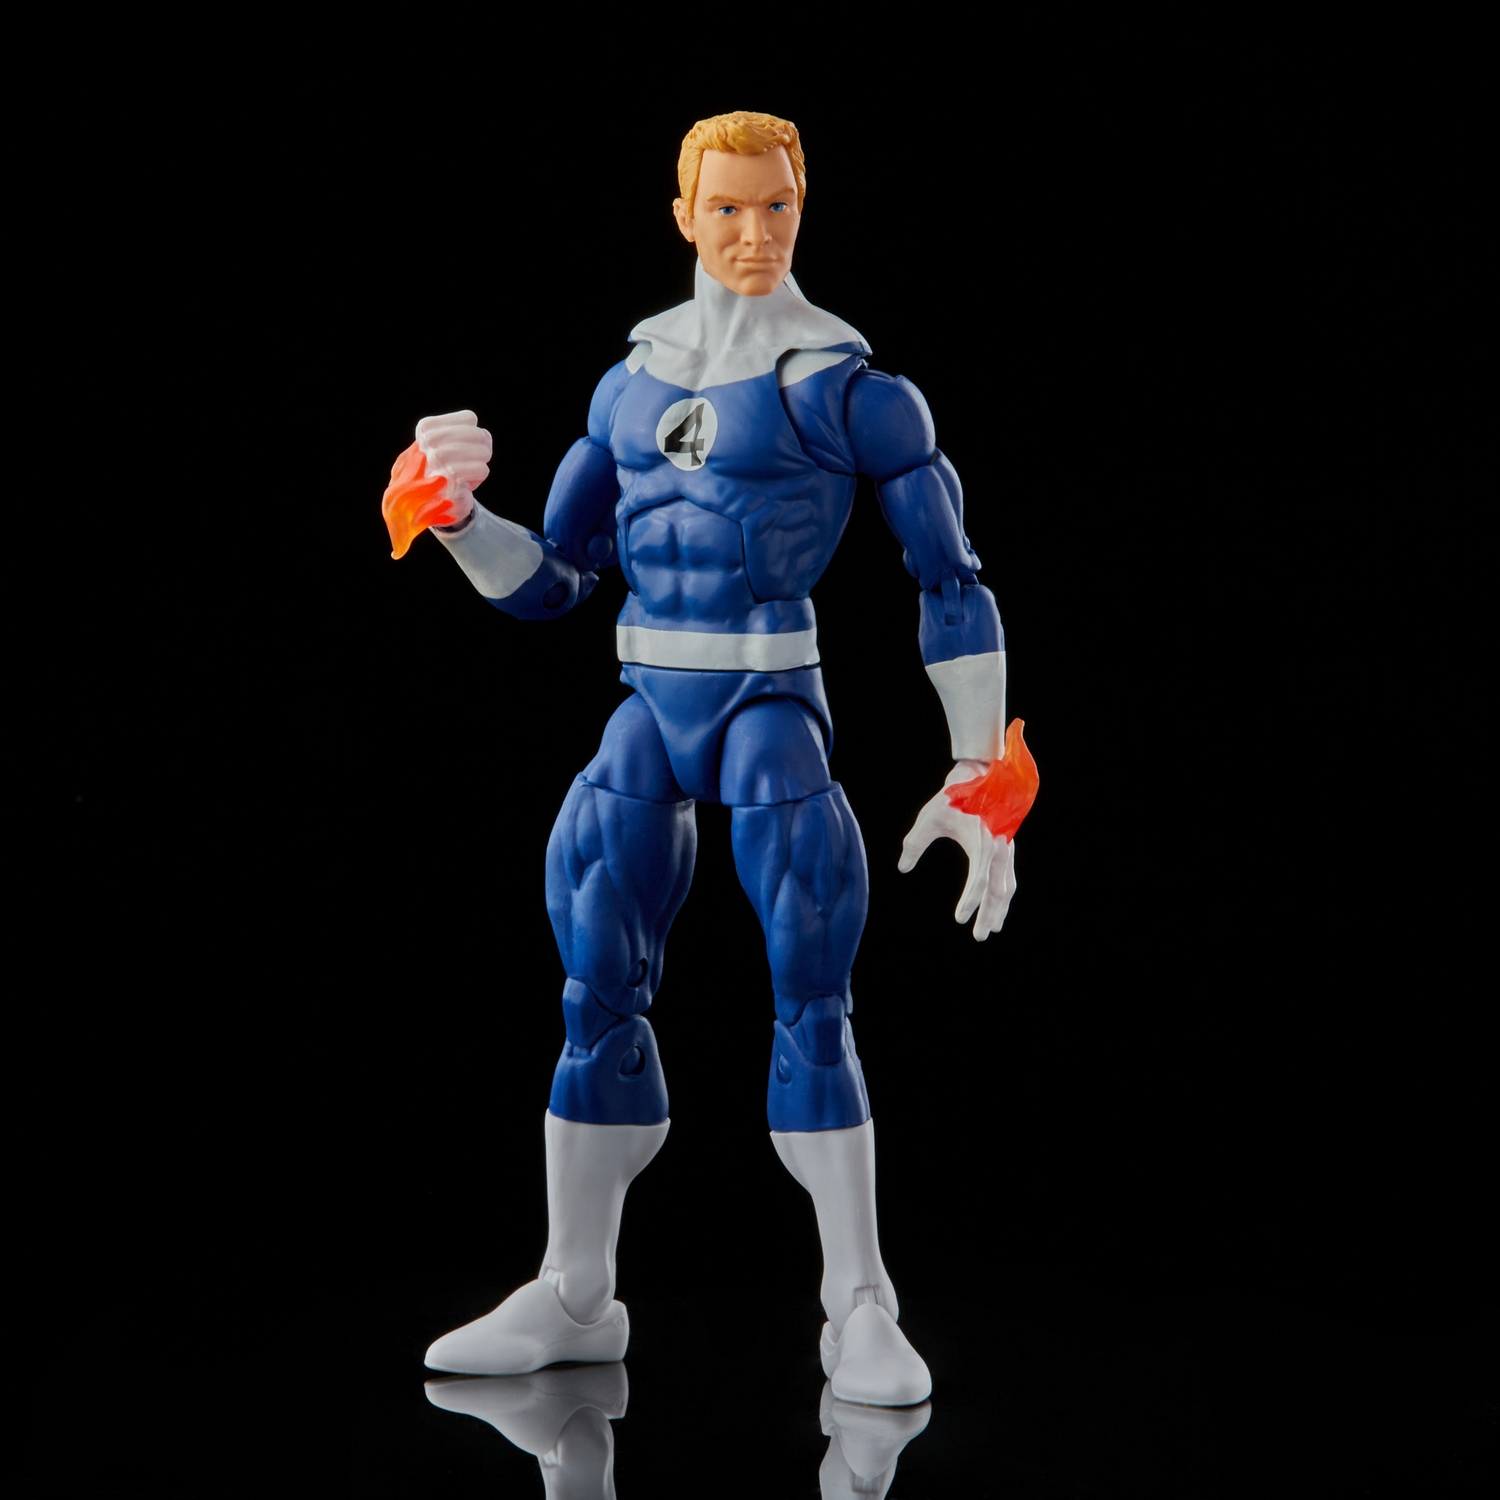 MARVEL LEGENDS SERIES 6-INCH RETRO FANTASTIC FOUR THE HUMAN TORCH Figure (Powered Down)_oop 9.jpg